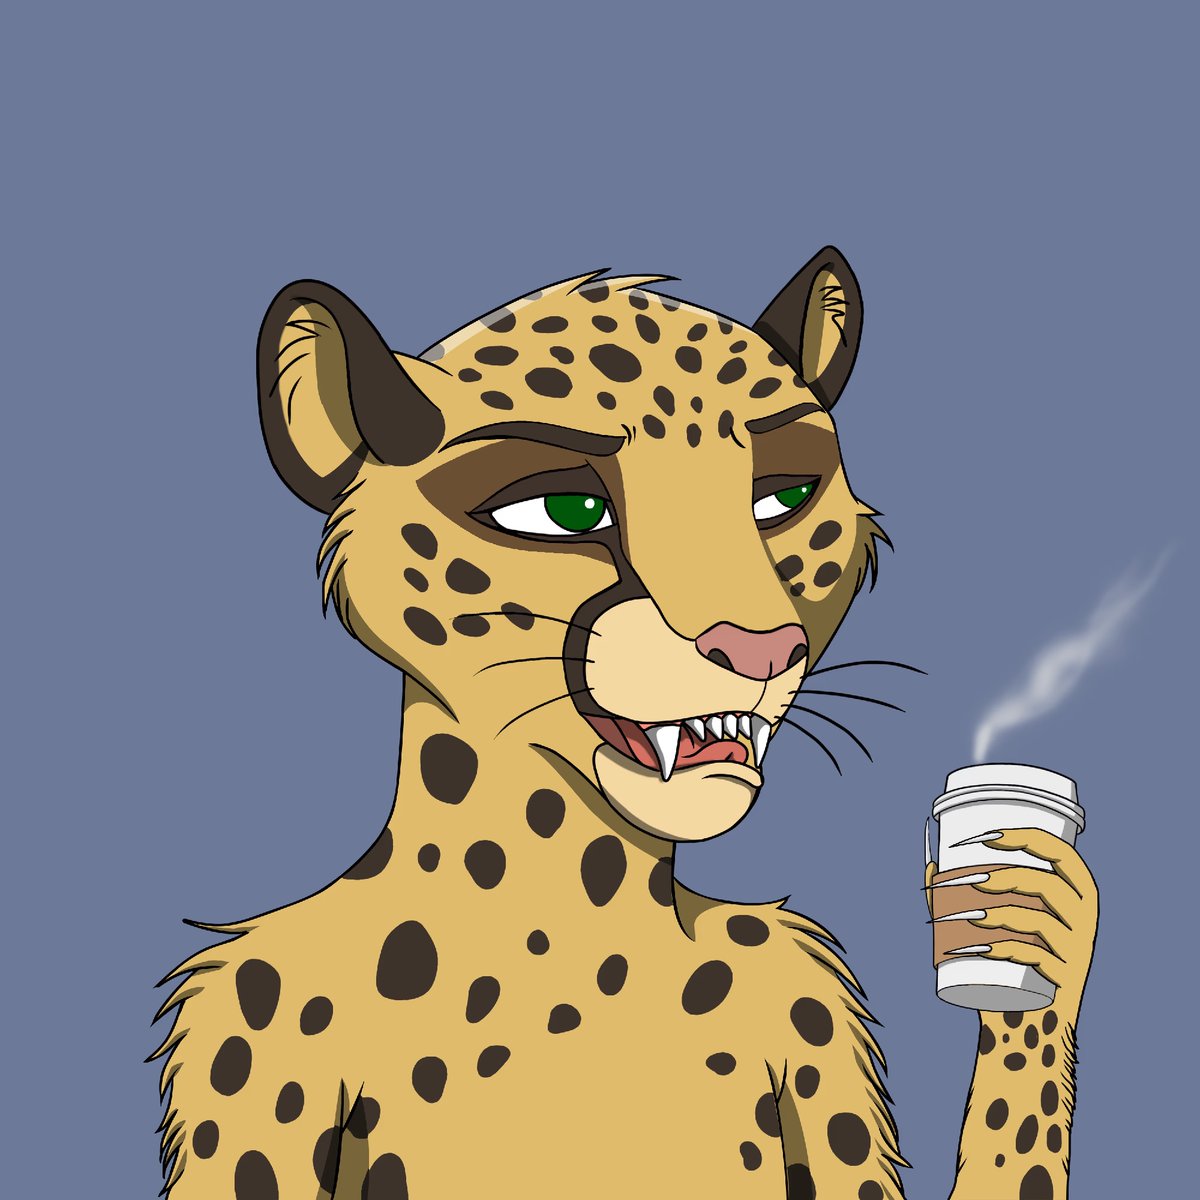 Picking up some more @CCrewNFT Cheetahs! Stacking those traits...and non traits! Naked Cheetah! And Naked Cheetah with Coffee